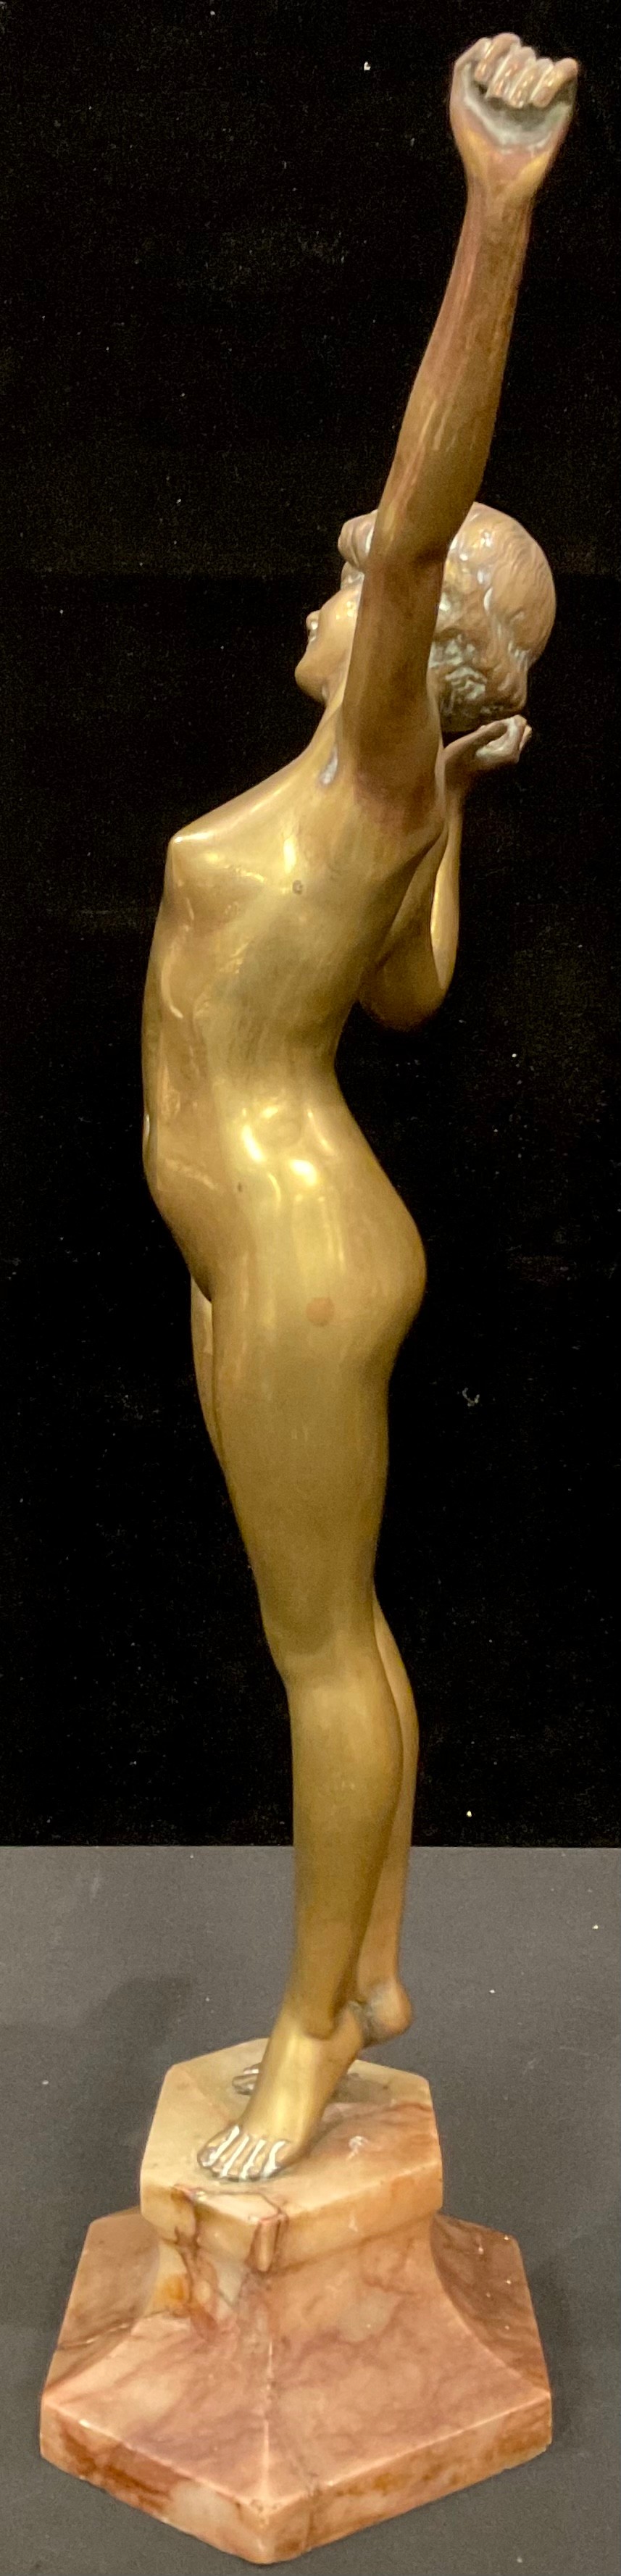 An Art Deco style brass figure, female nude on tiptoes mid stretch, angular onyx base, 55cm - Image 4 of 4